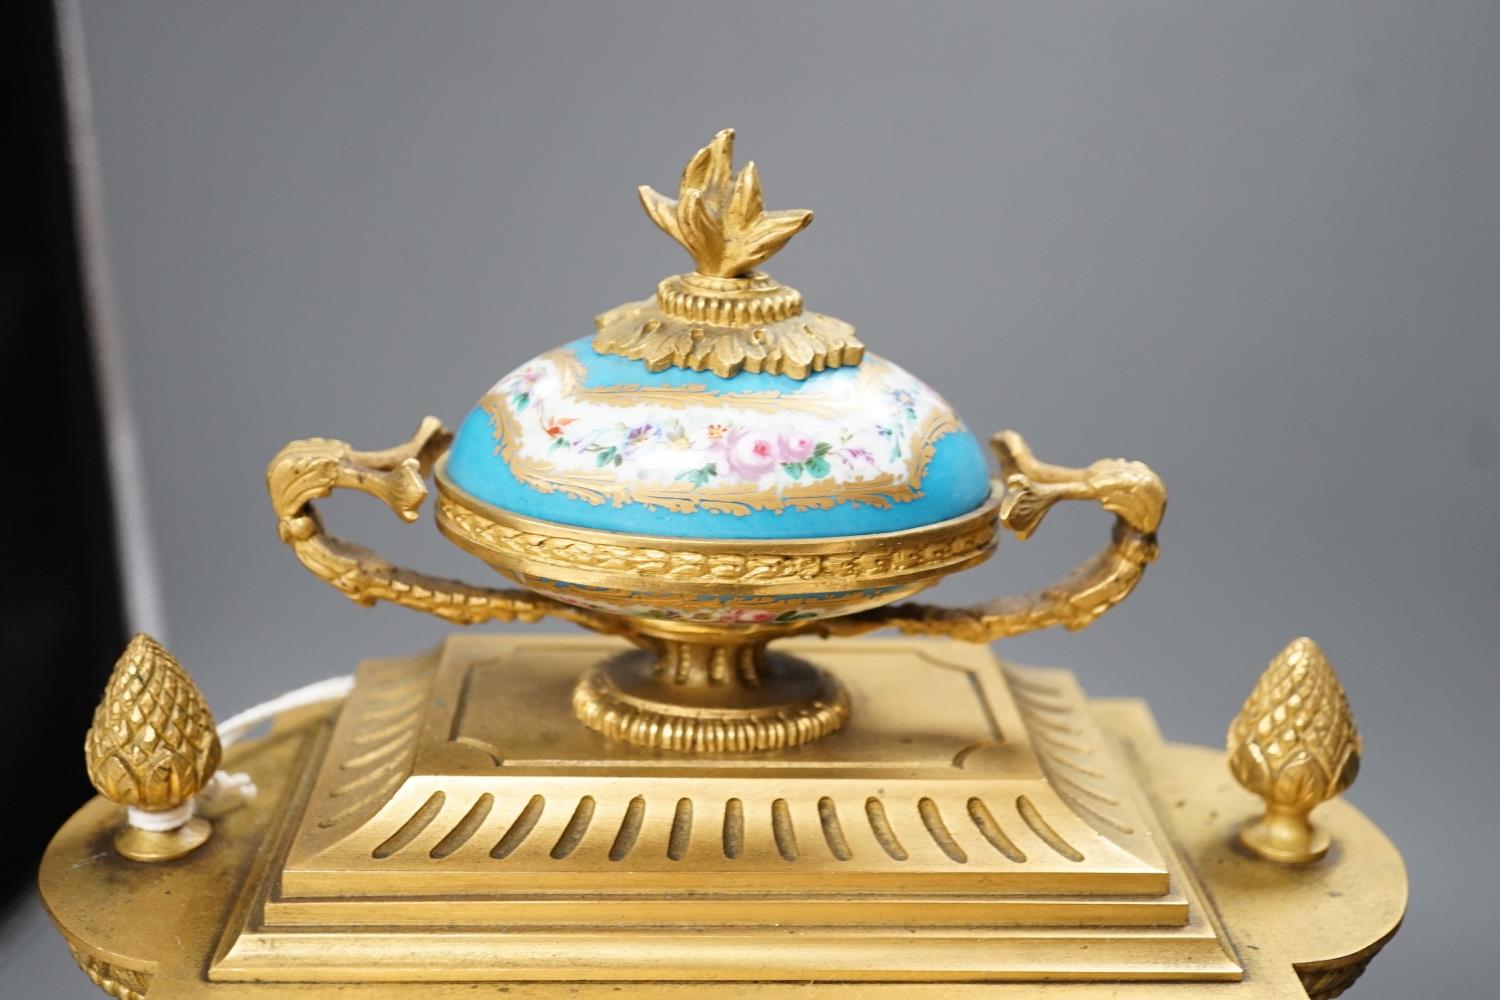 A French ormolu mantel clock, with inset floral decorated porcelain plaques and dial, 40cms high - Image 3 of 7